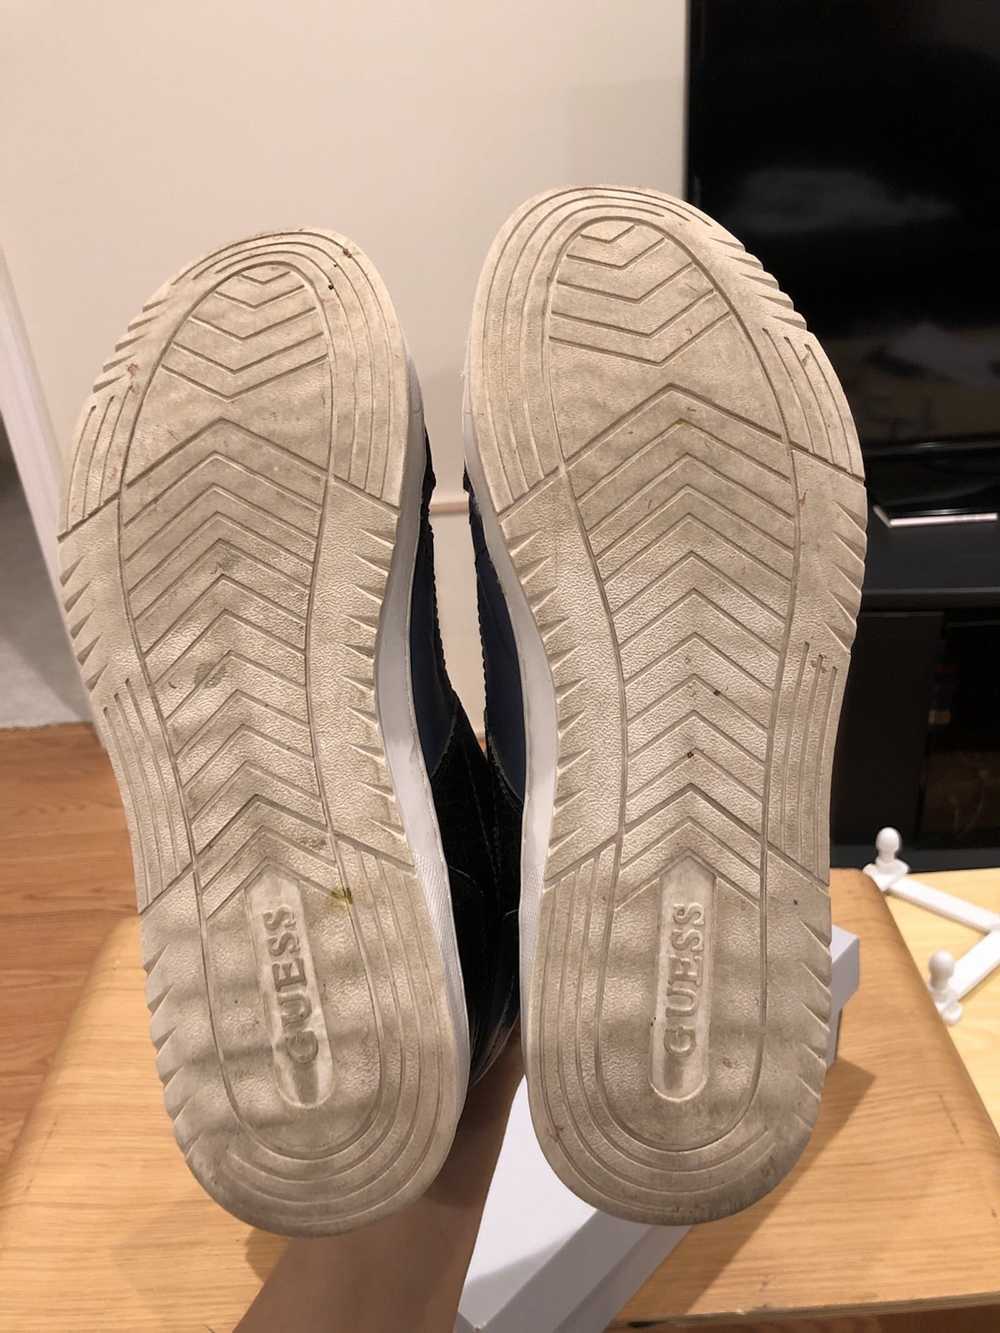 Guess Vintage Guess Sneakers - image 6